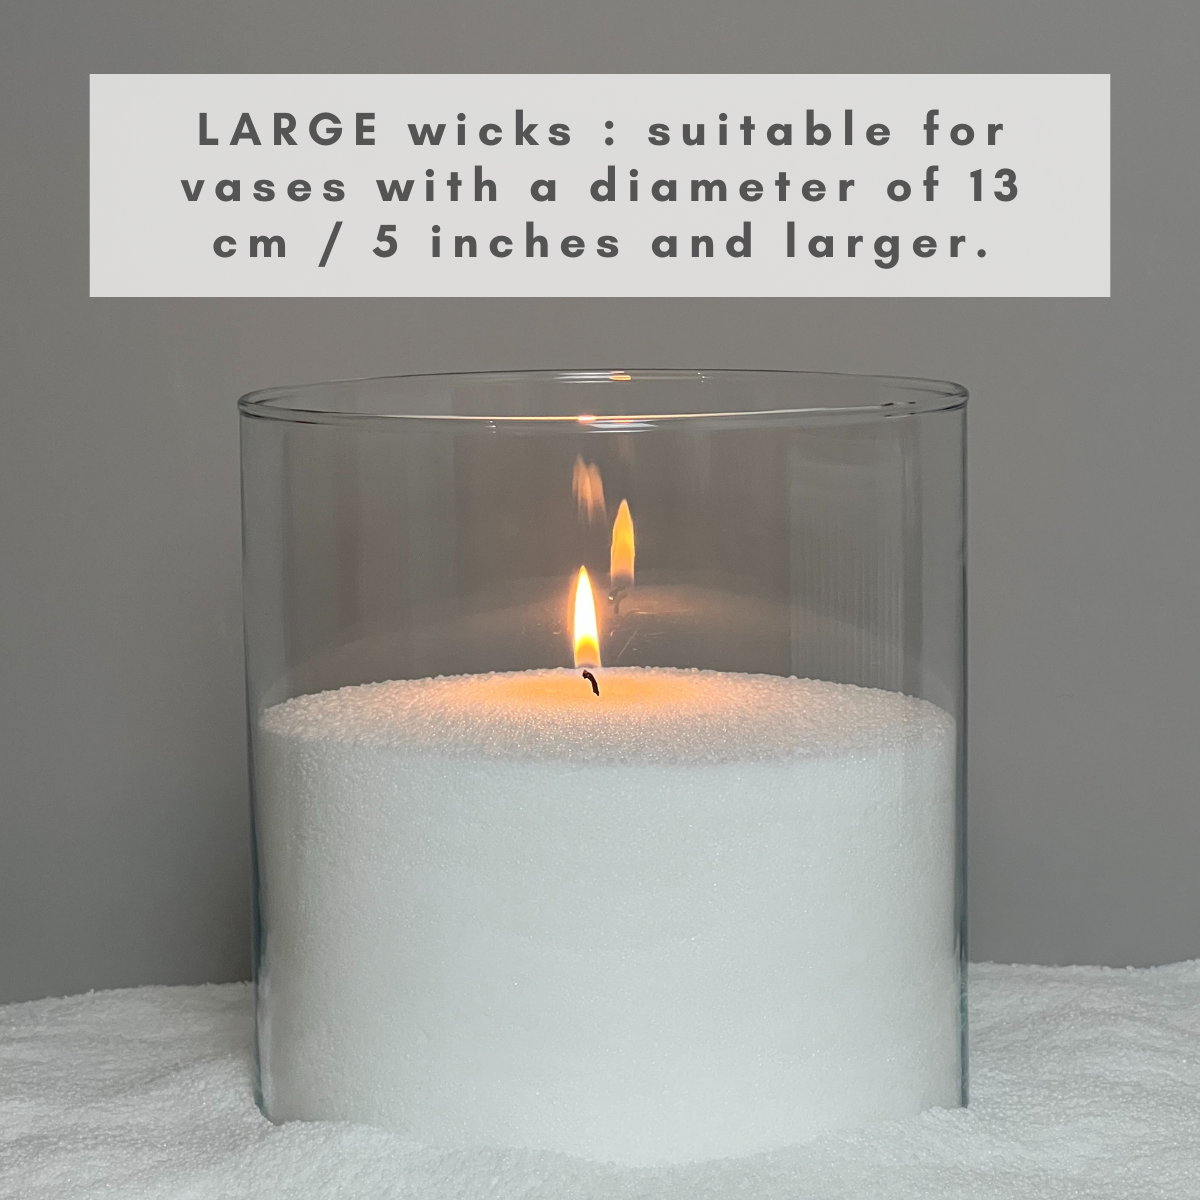 Large Wick thickness for Candle Sand Large Wicks suitable for vases with a diameter of 13 cm / 5 inches and larger